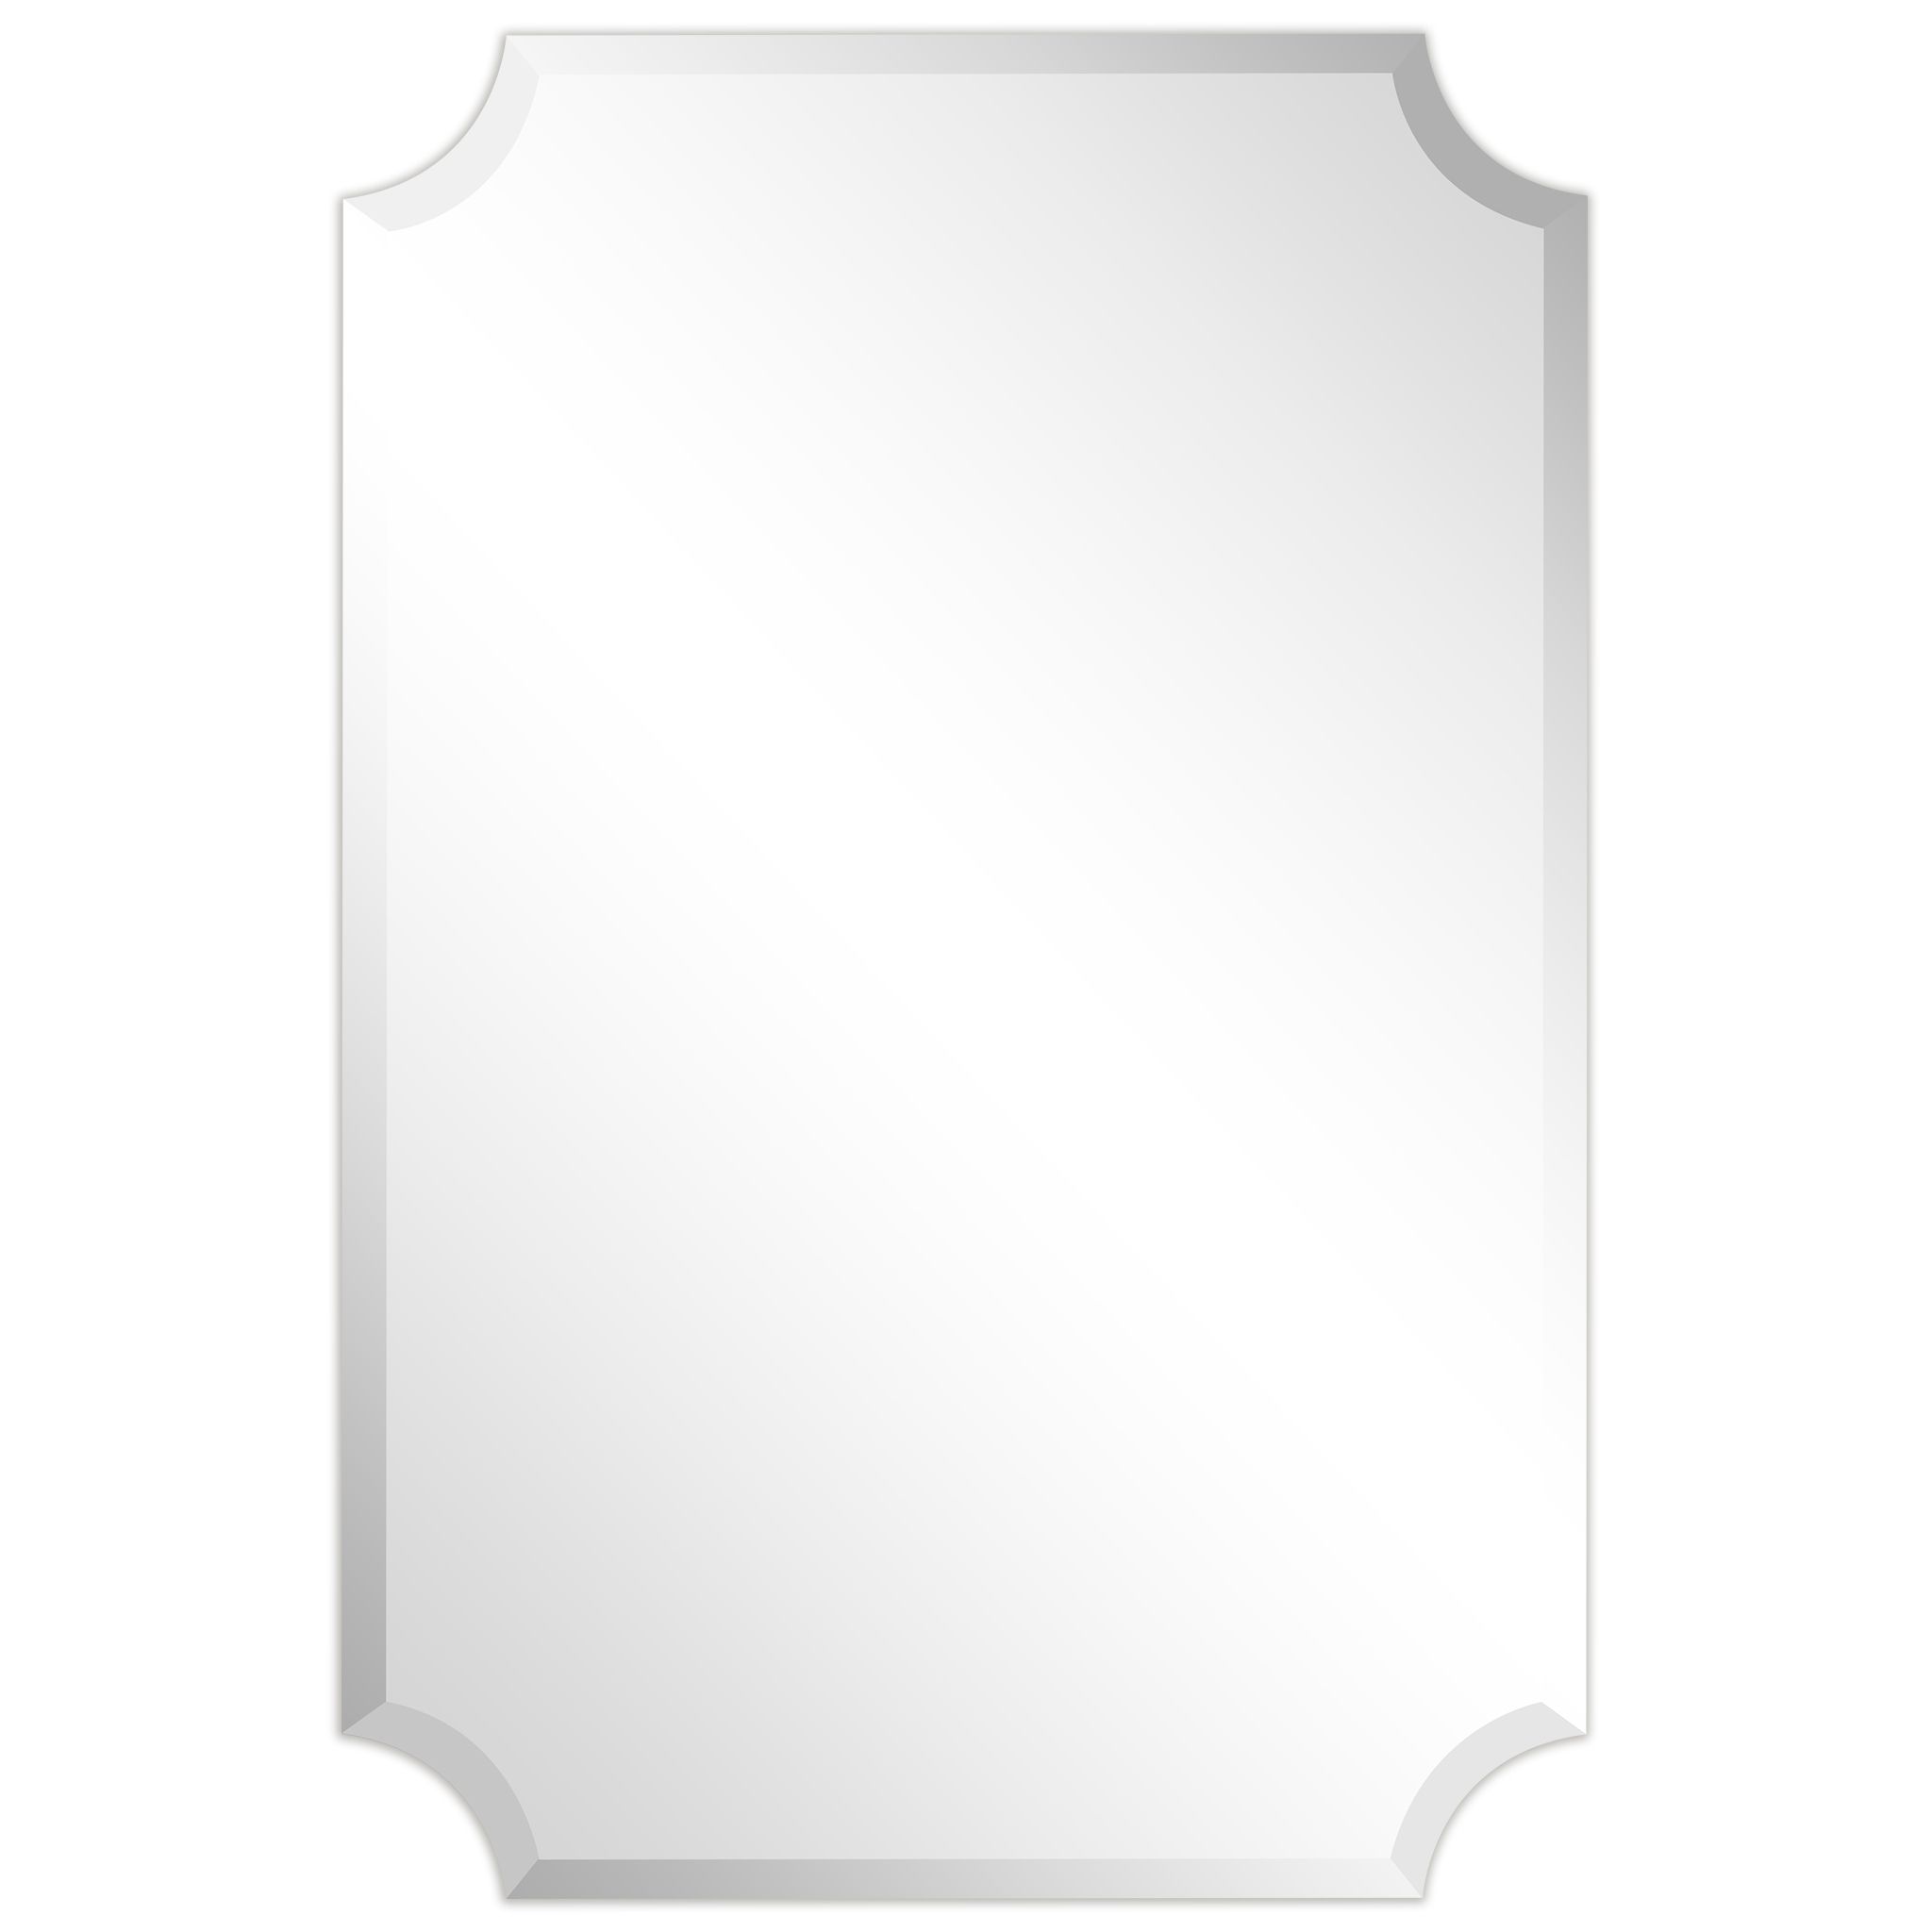 Empire Art Direct Frameless Rectangle Scalloped Beveled Wall Mirror, 24 For Polygonal Scalloped Frameless Wall Mirrors (View 3 of 15)